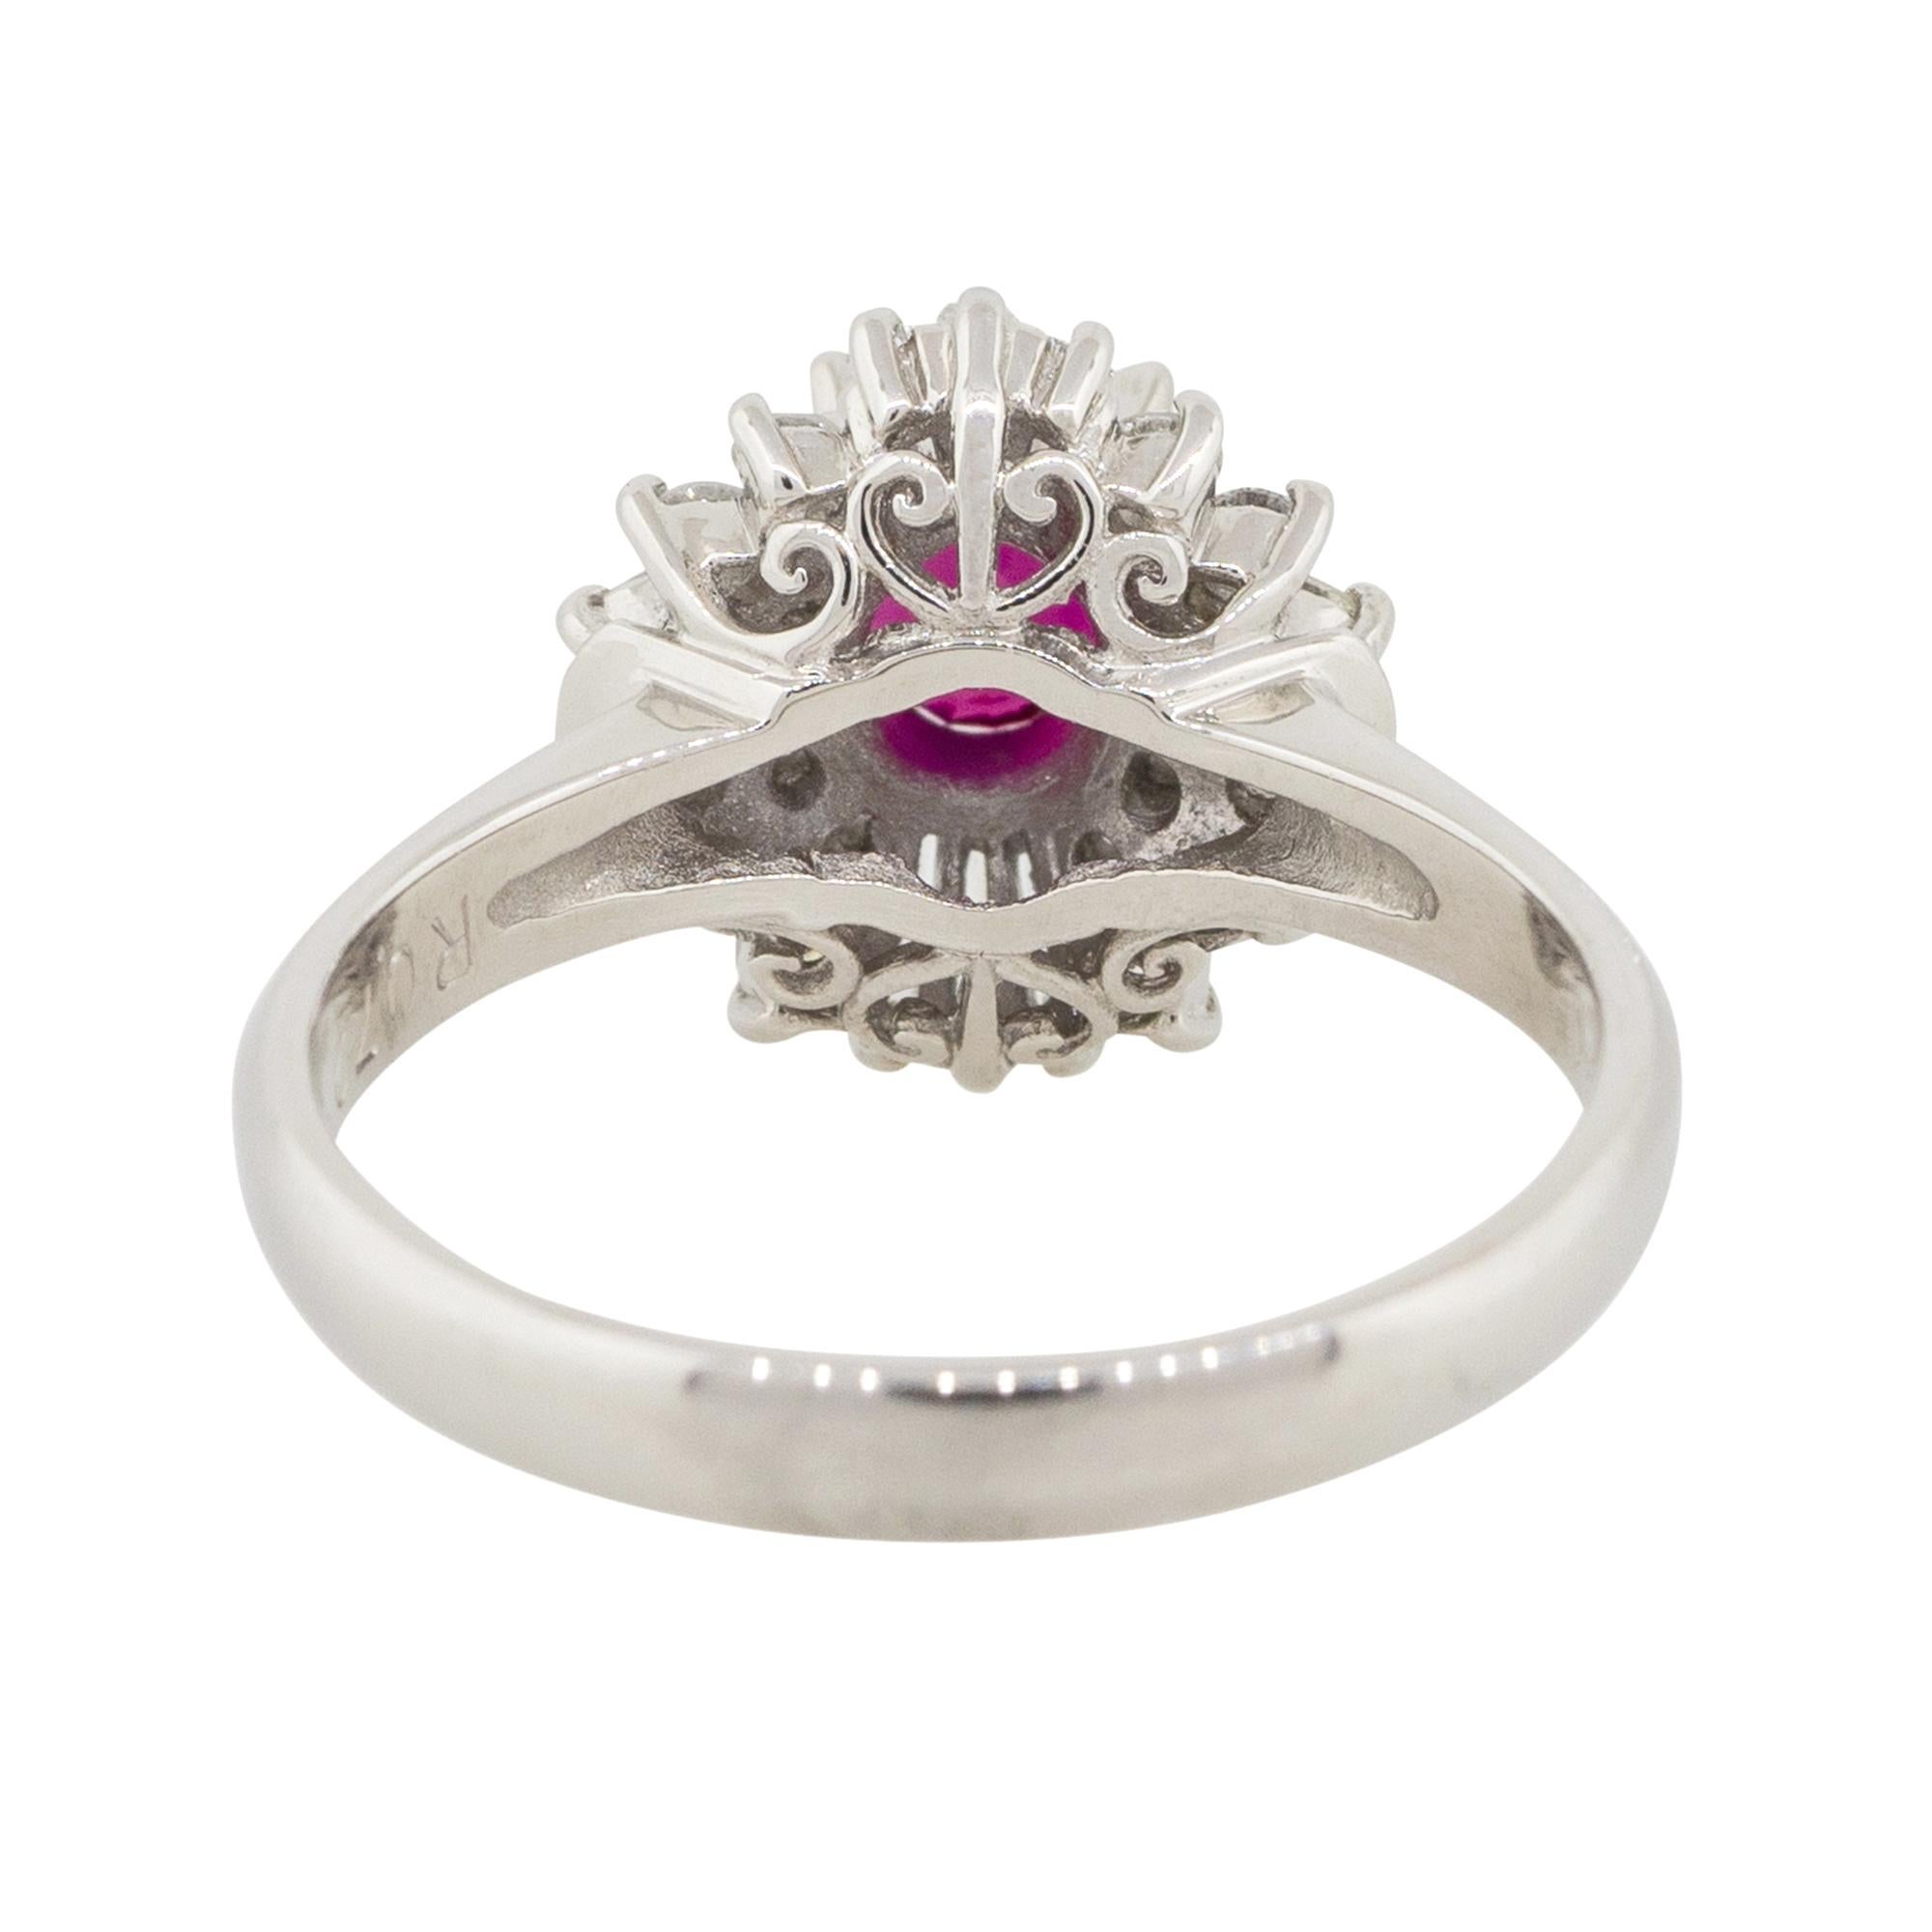 0.72 Carat Oval Ruby Center Diamond Cocktail Ring Platinum in Stock In New Condition For Sale In Boca Raton, FL